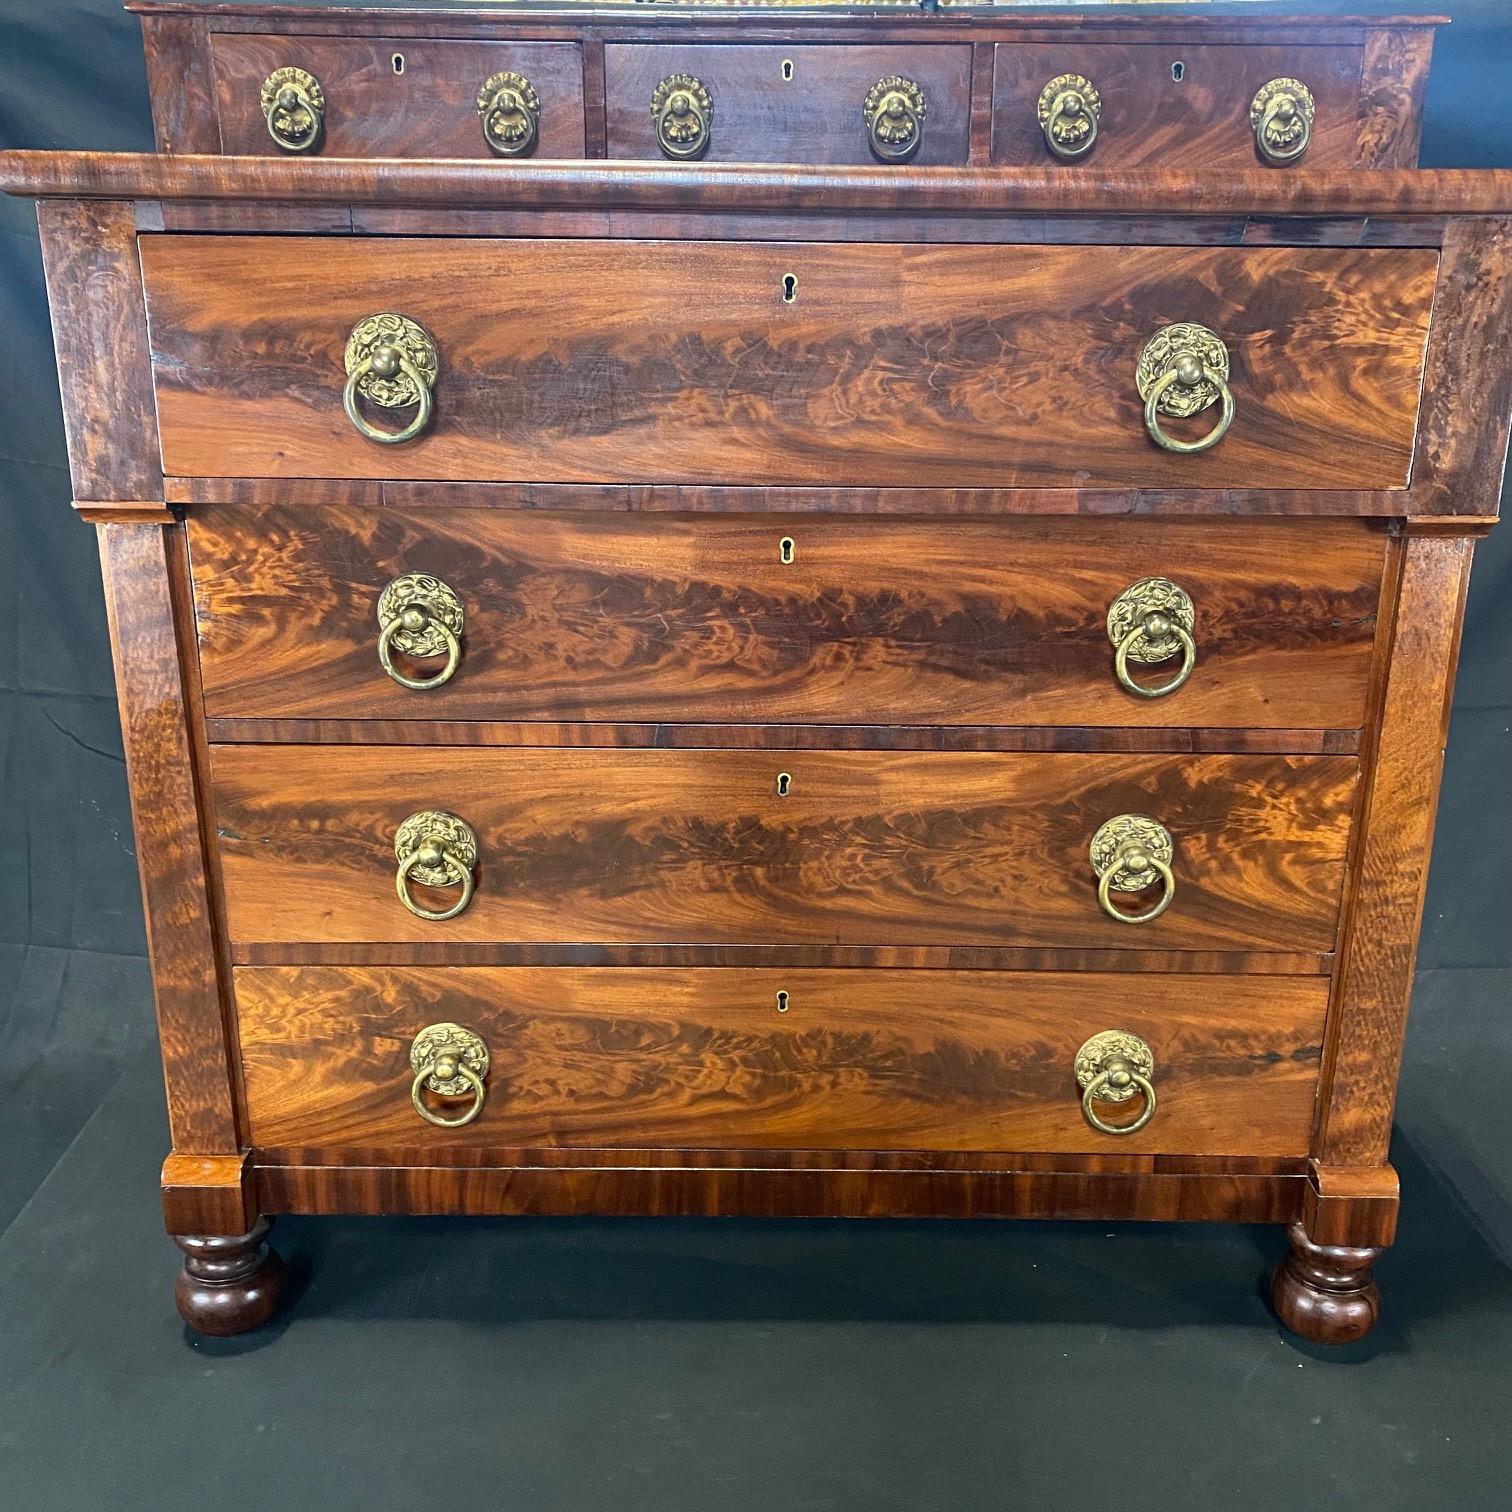 Sheraton step back chest of drawers with three top drawers over four large drawers, Maine origin, circa mid 1800s. With a step back profile and overhanging top drawer, bearing elements of both the Sheraton and Empire styles, the commode features